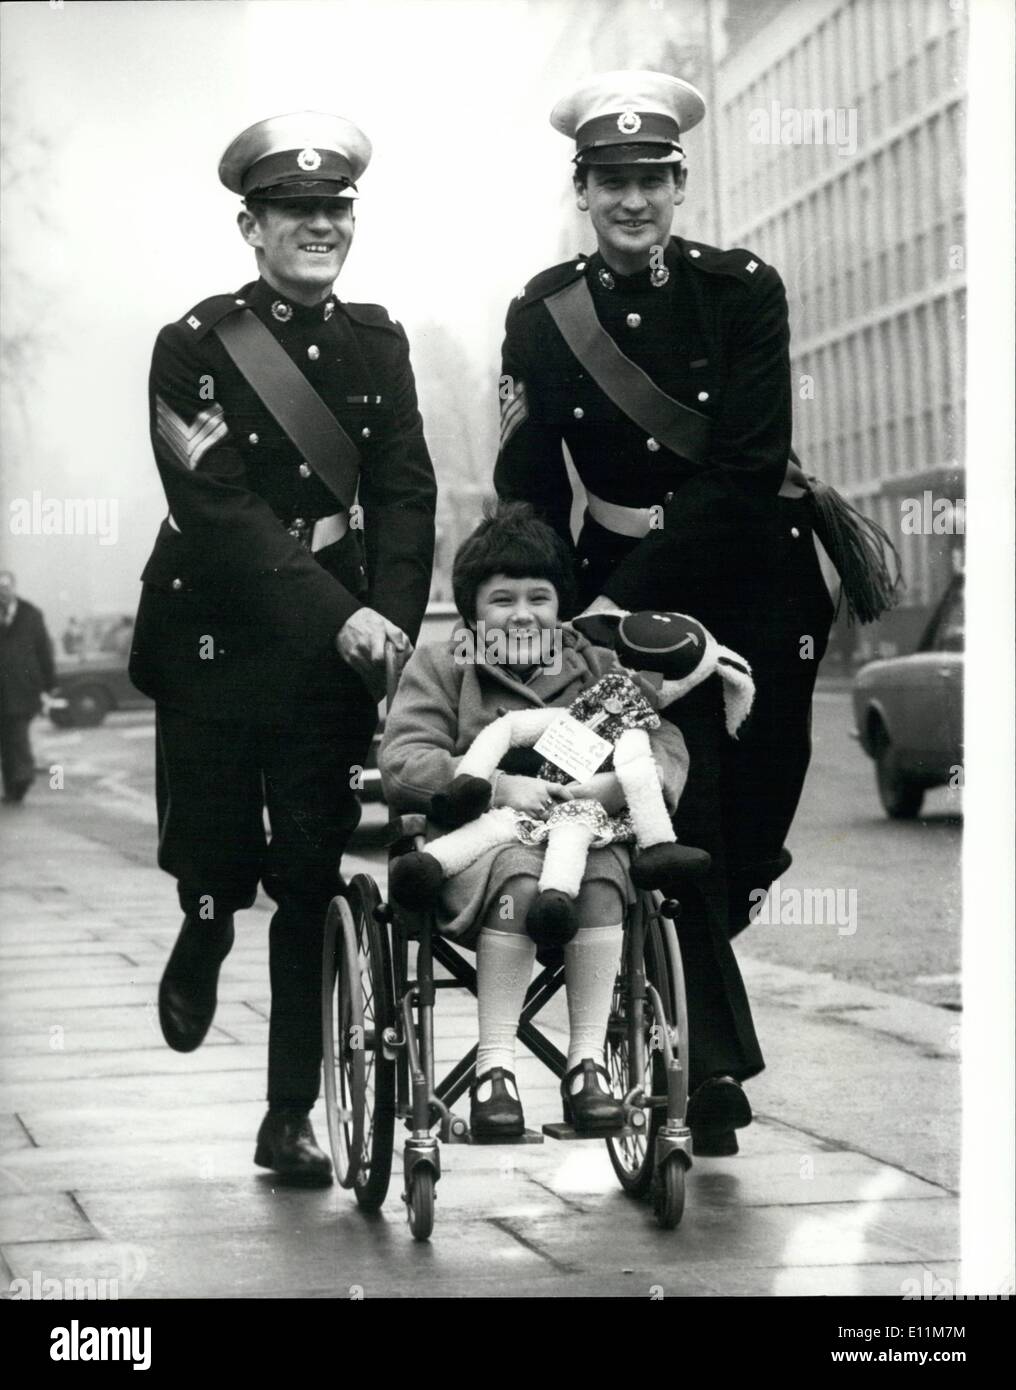 Feb. 02, 1979 - 8 year-old Karen Whiteside a Cancer Suffer is the Special Guest of the Royal Marines.: 8 years-old Karen Whiteside, from Fulwood, near Preston, arrived at London's Euston Station today and was greeted by two members of the Royal Marines. Band. She is the special guest of the Marines at the Malcolm Sargent Cancer Fund for Children which takes place at the Royal Albert Hall tomorrow night, in which they will be playing. Photo shows The two members of the Royal Marine Band, Sgt Duck MacArdls , left , and Sgt. Tom Simpson give Karen a push after meeting her at Euston Station today Stock Photo